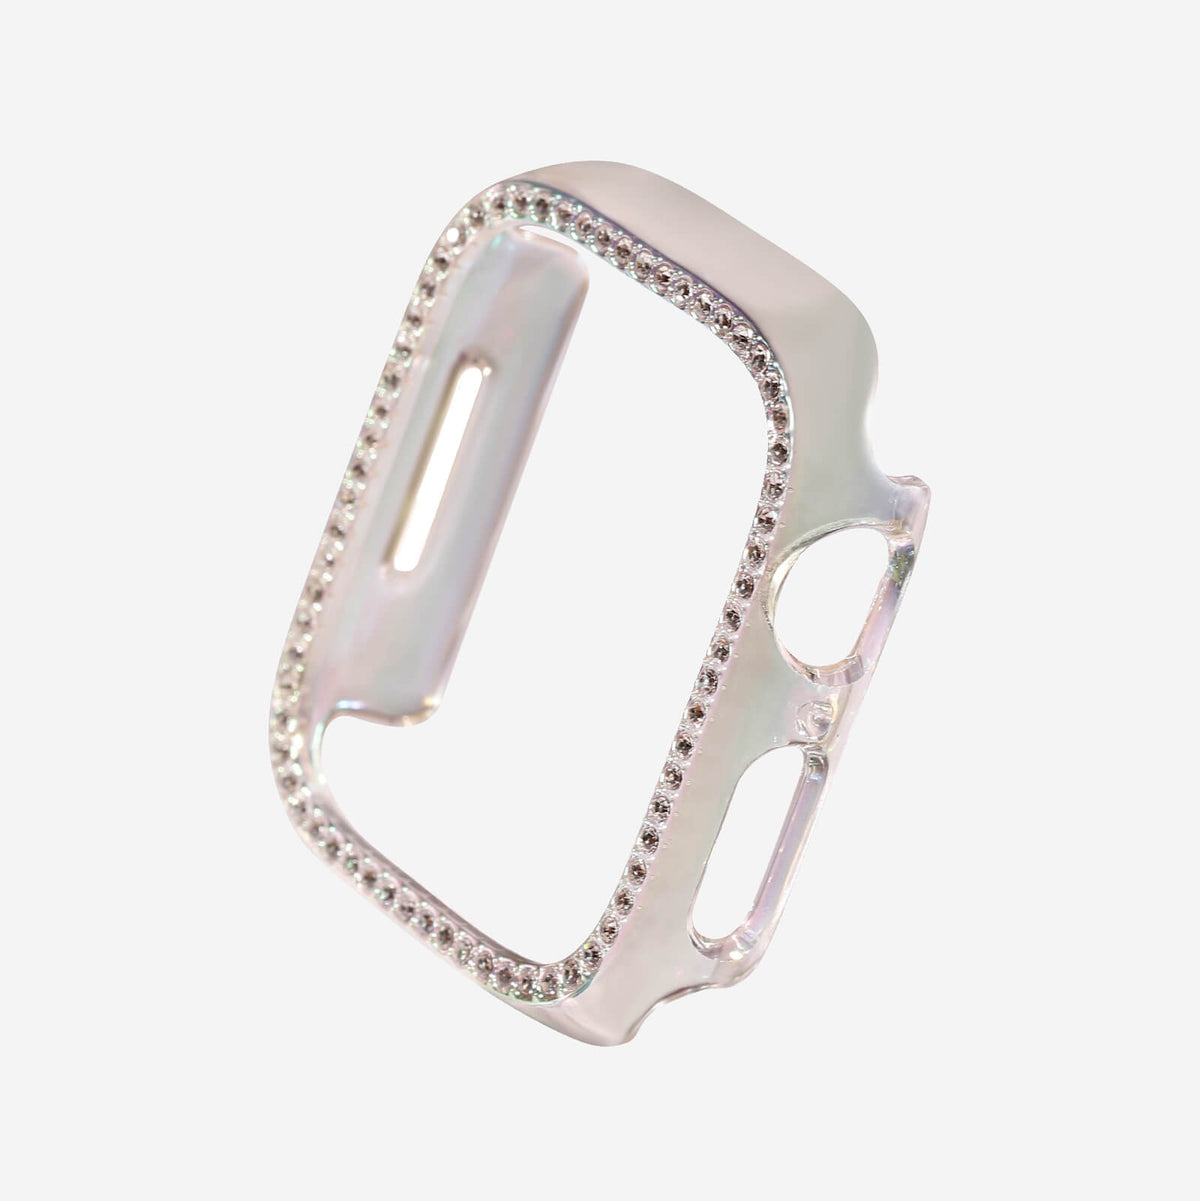 Apple Watch Single Halo Crystal Bumper Case - Pearlescent